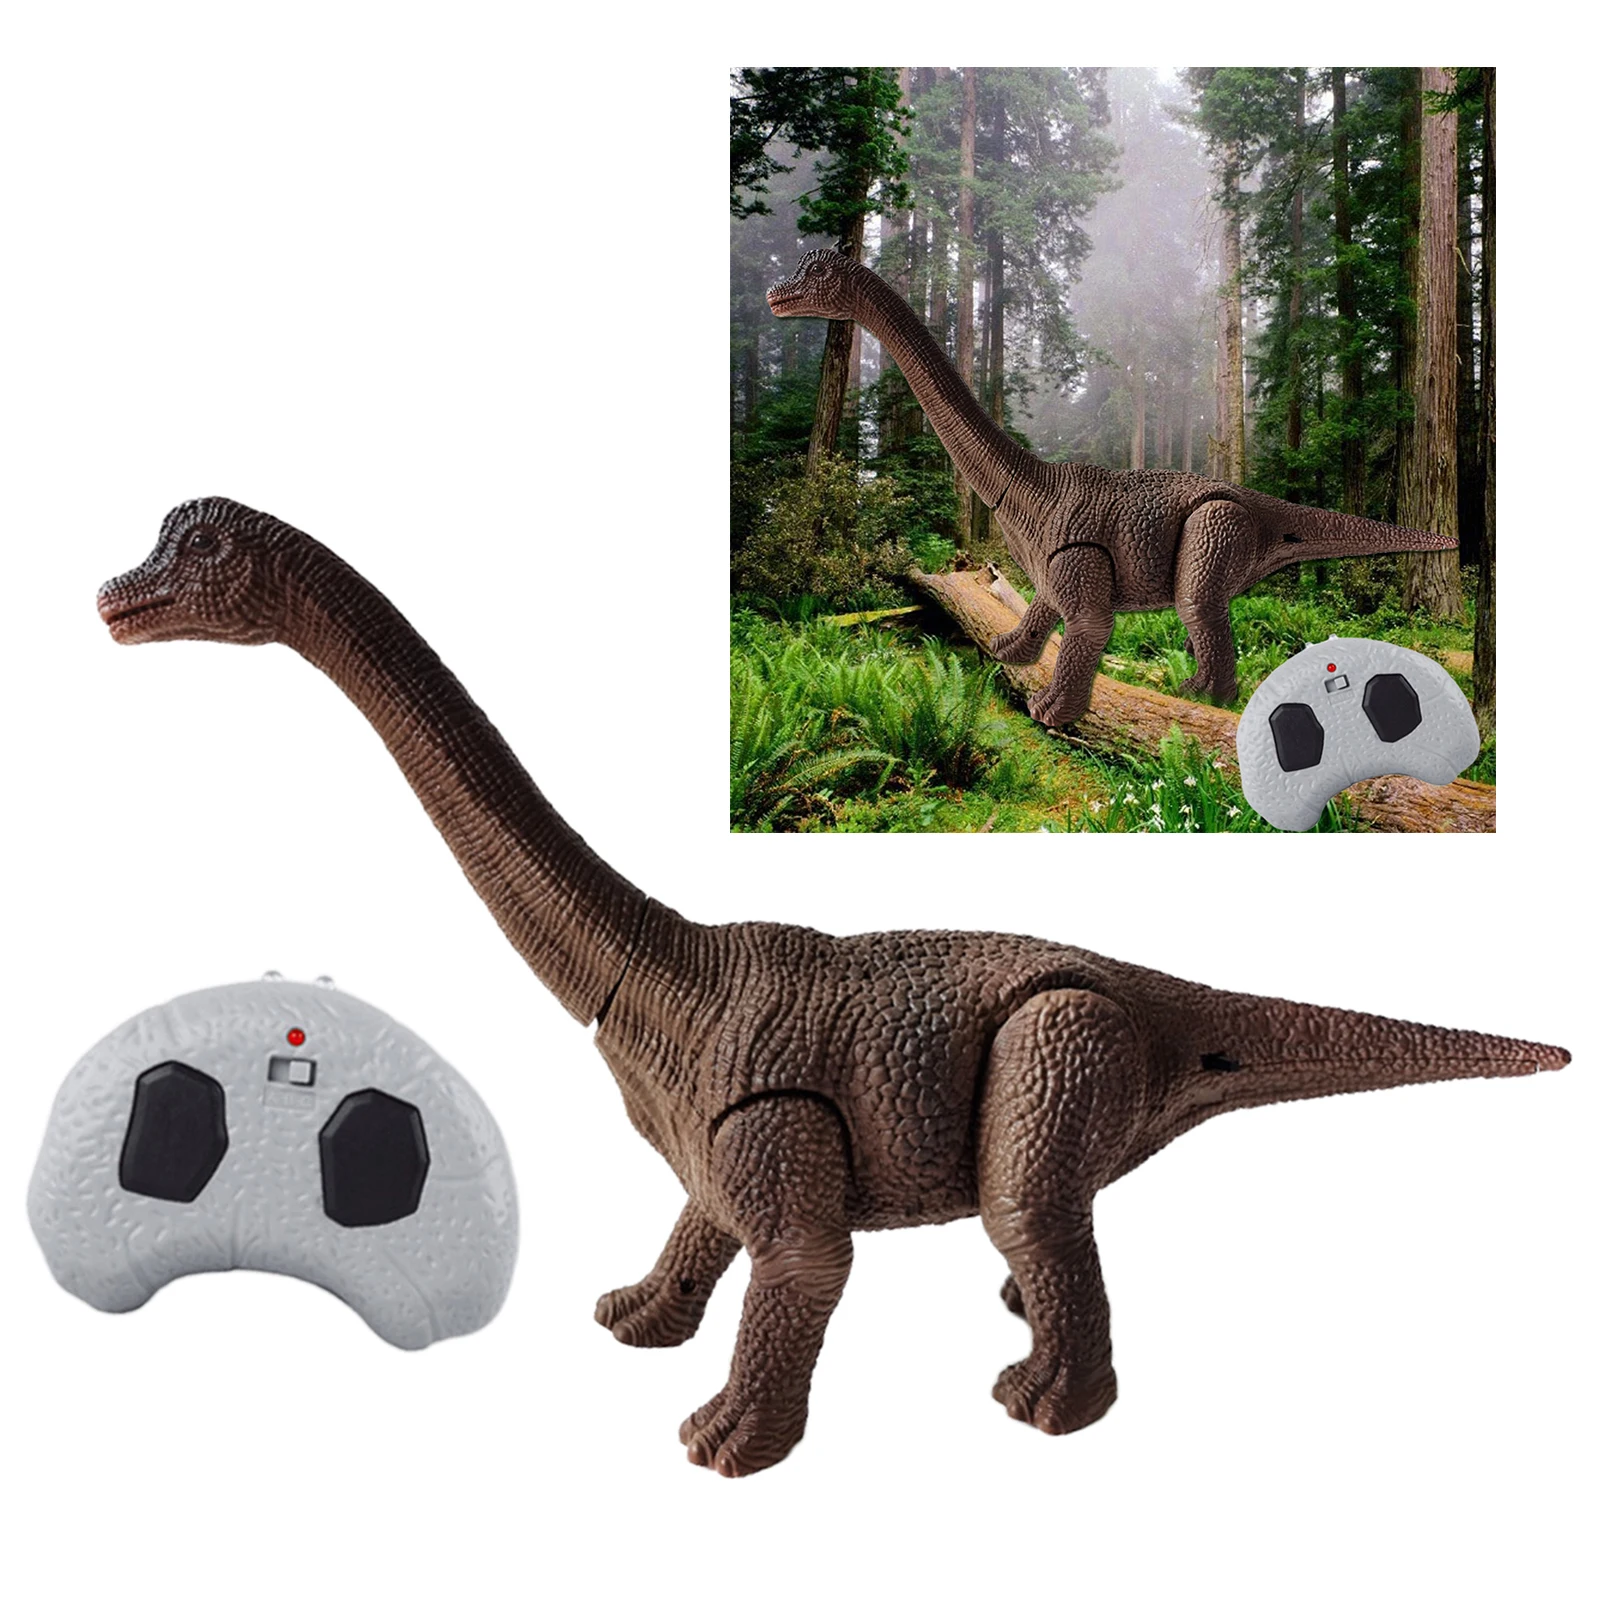 RC Dinosaur Toy for Boys Girls Action Figure Electronic Toys Walking with LED Light Up Battery Operated Age 3+